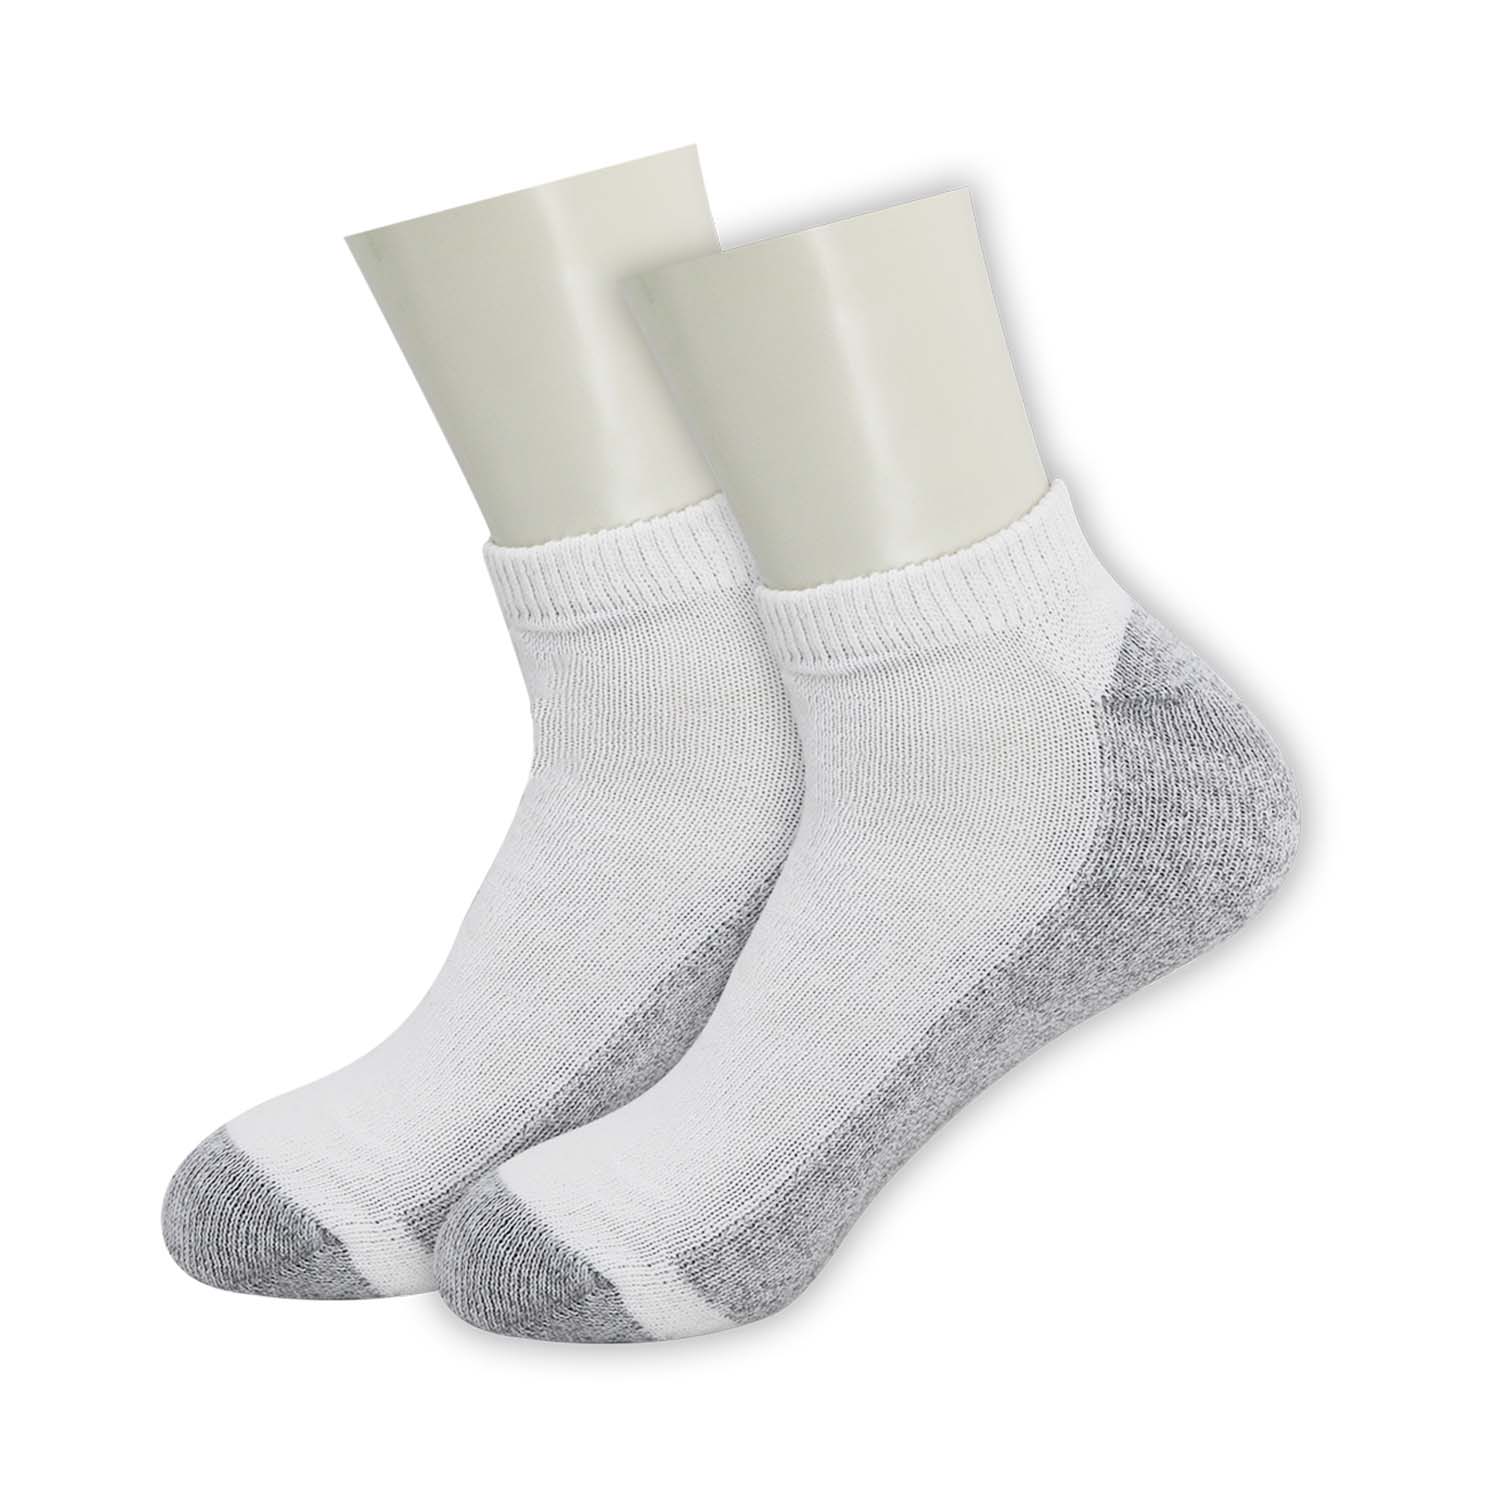 Unisex Low Cut Wholesale Sock, Size 10-13 in White with Grey - Bulk Case of 180 Pairs